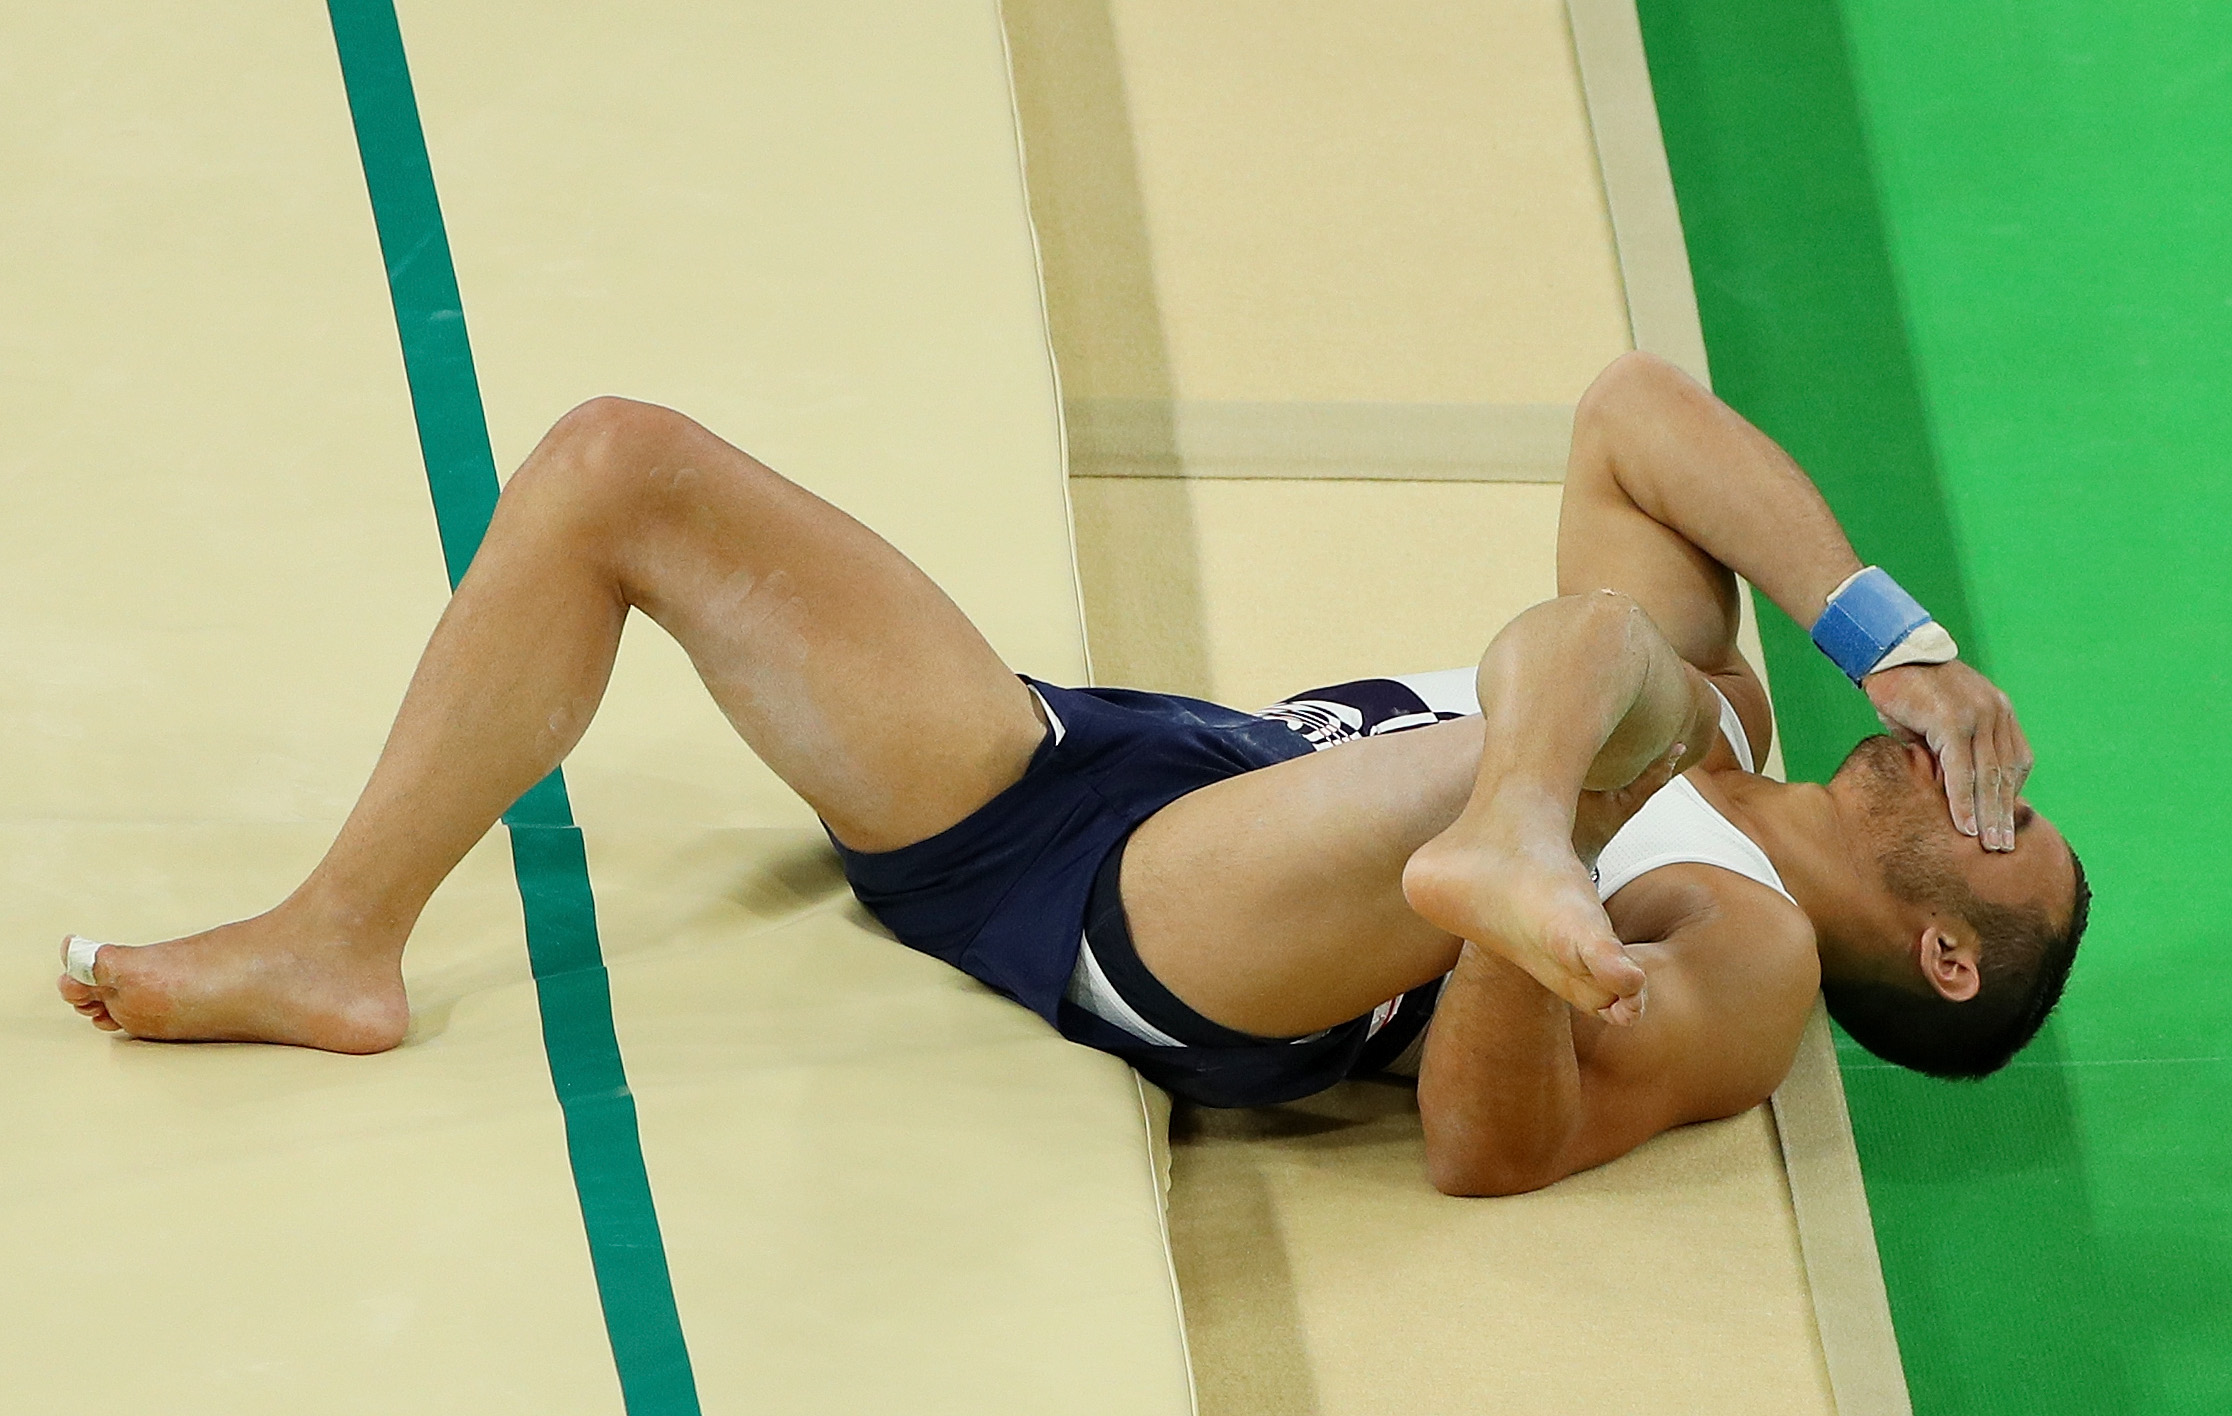 French Athlete Samir Ait Said Breaks His Leg During Vault on Opening Day of Rio Olympics 2016